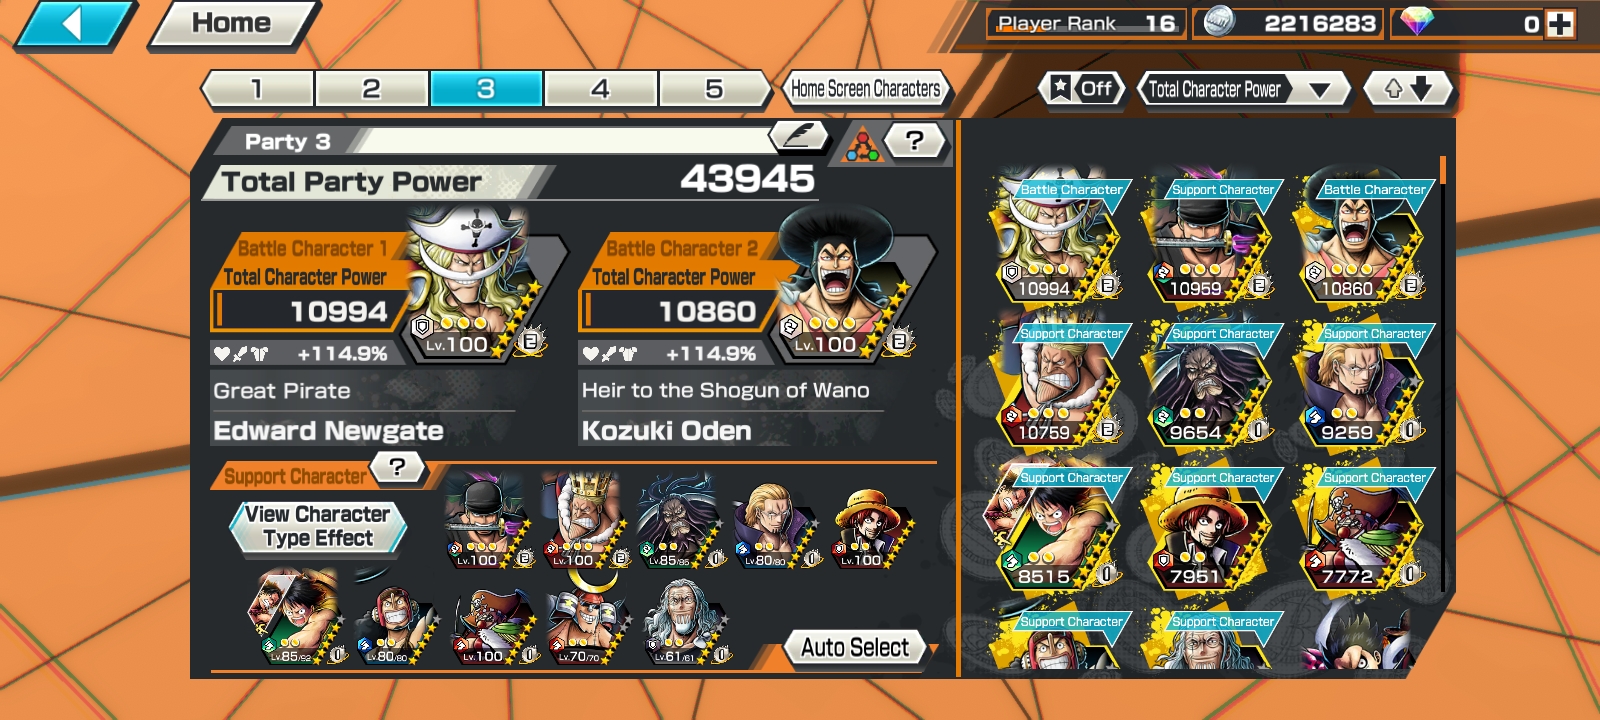 IOS+Android-2 Ex Max(Whitebeard+Zoro)-Oden V2 max-Rayleigh v2-Good Medal-SP 115%-HP802